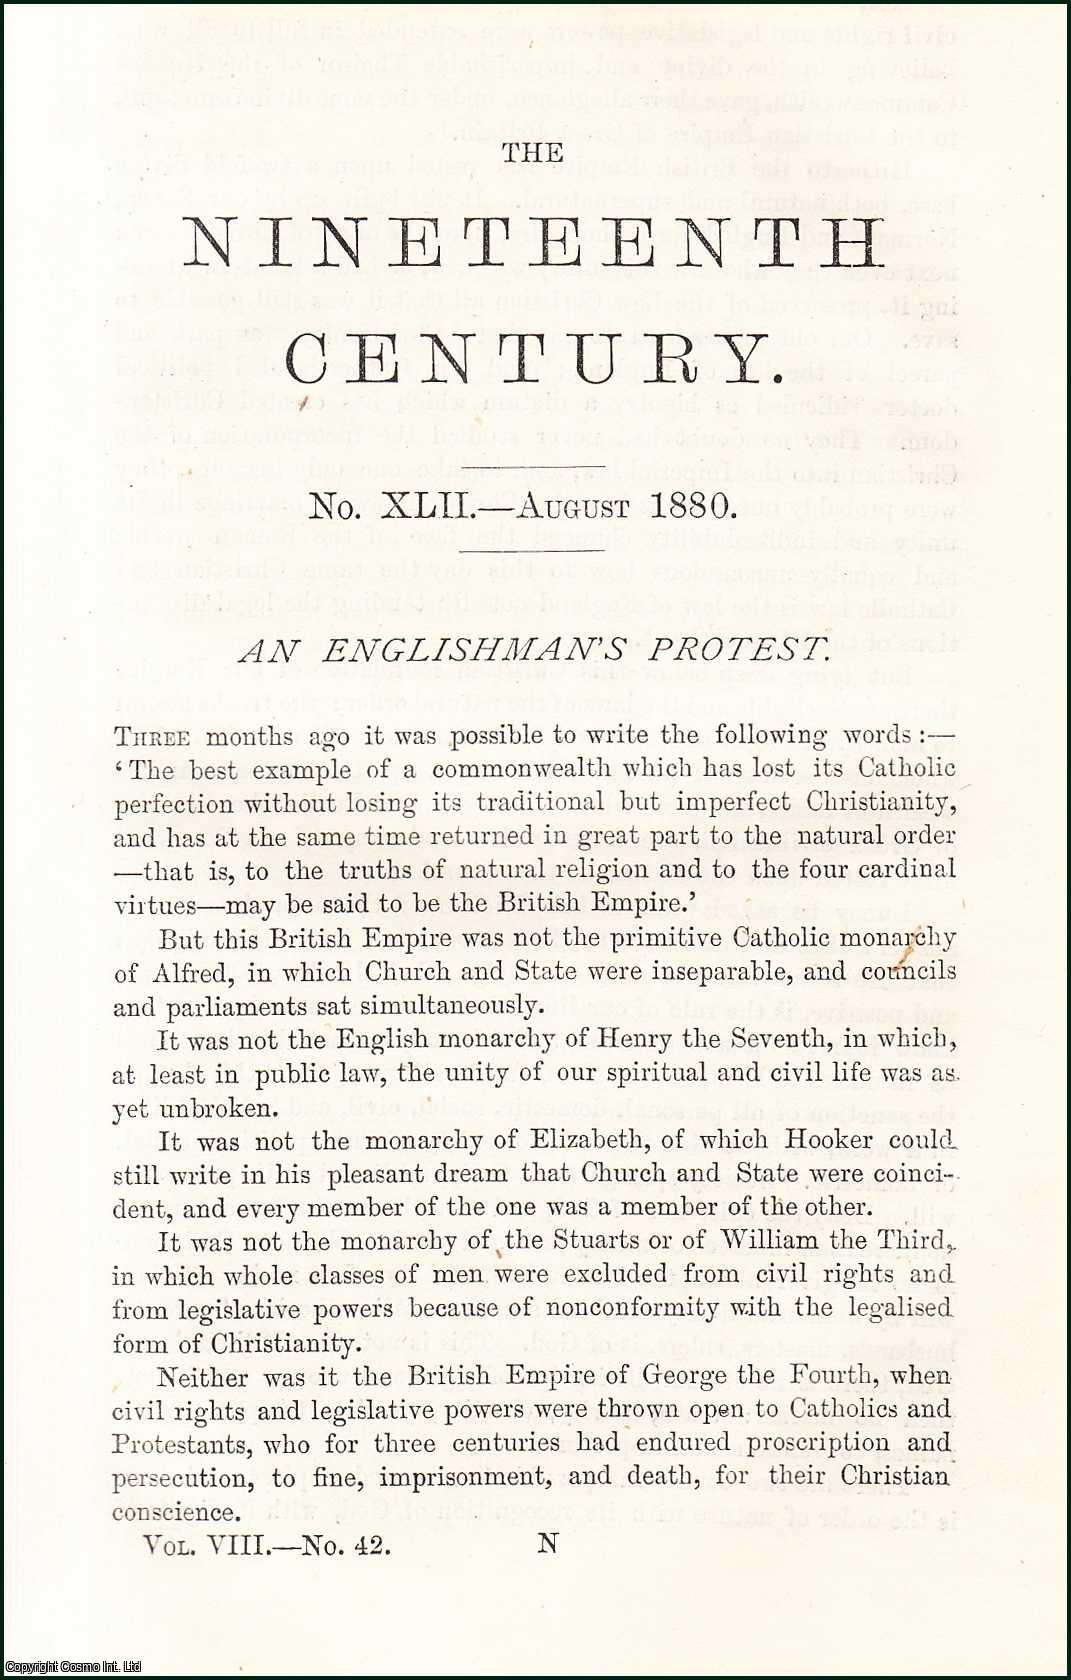 H.E. Manning - An Englishman's Protest on Church and State. An original article from the Nineteenth Century Magazine, 1880.